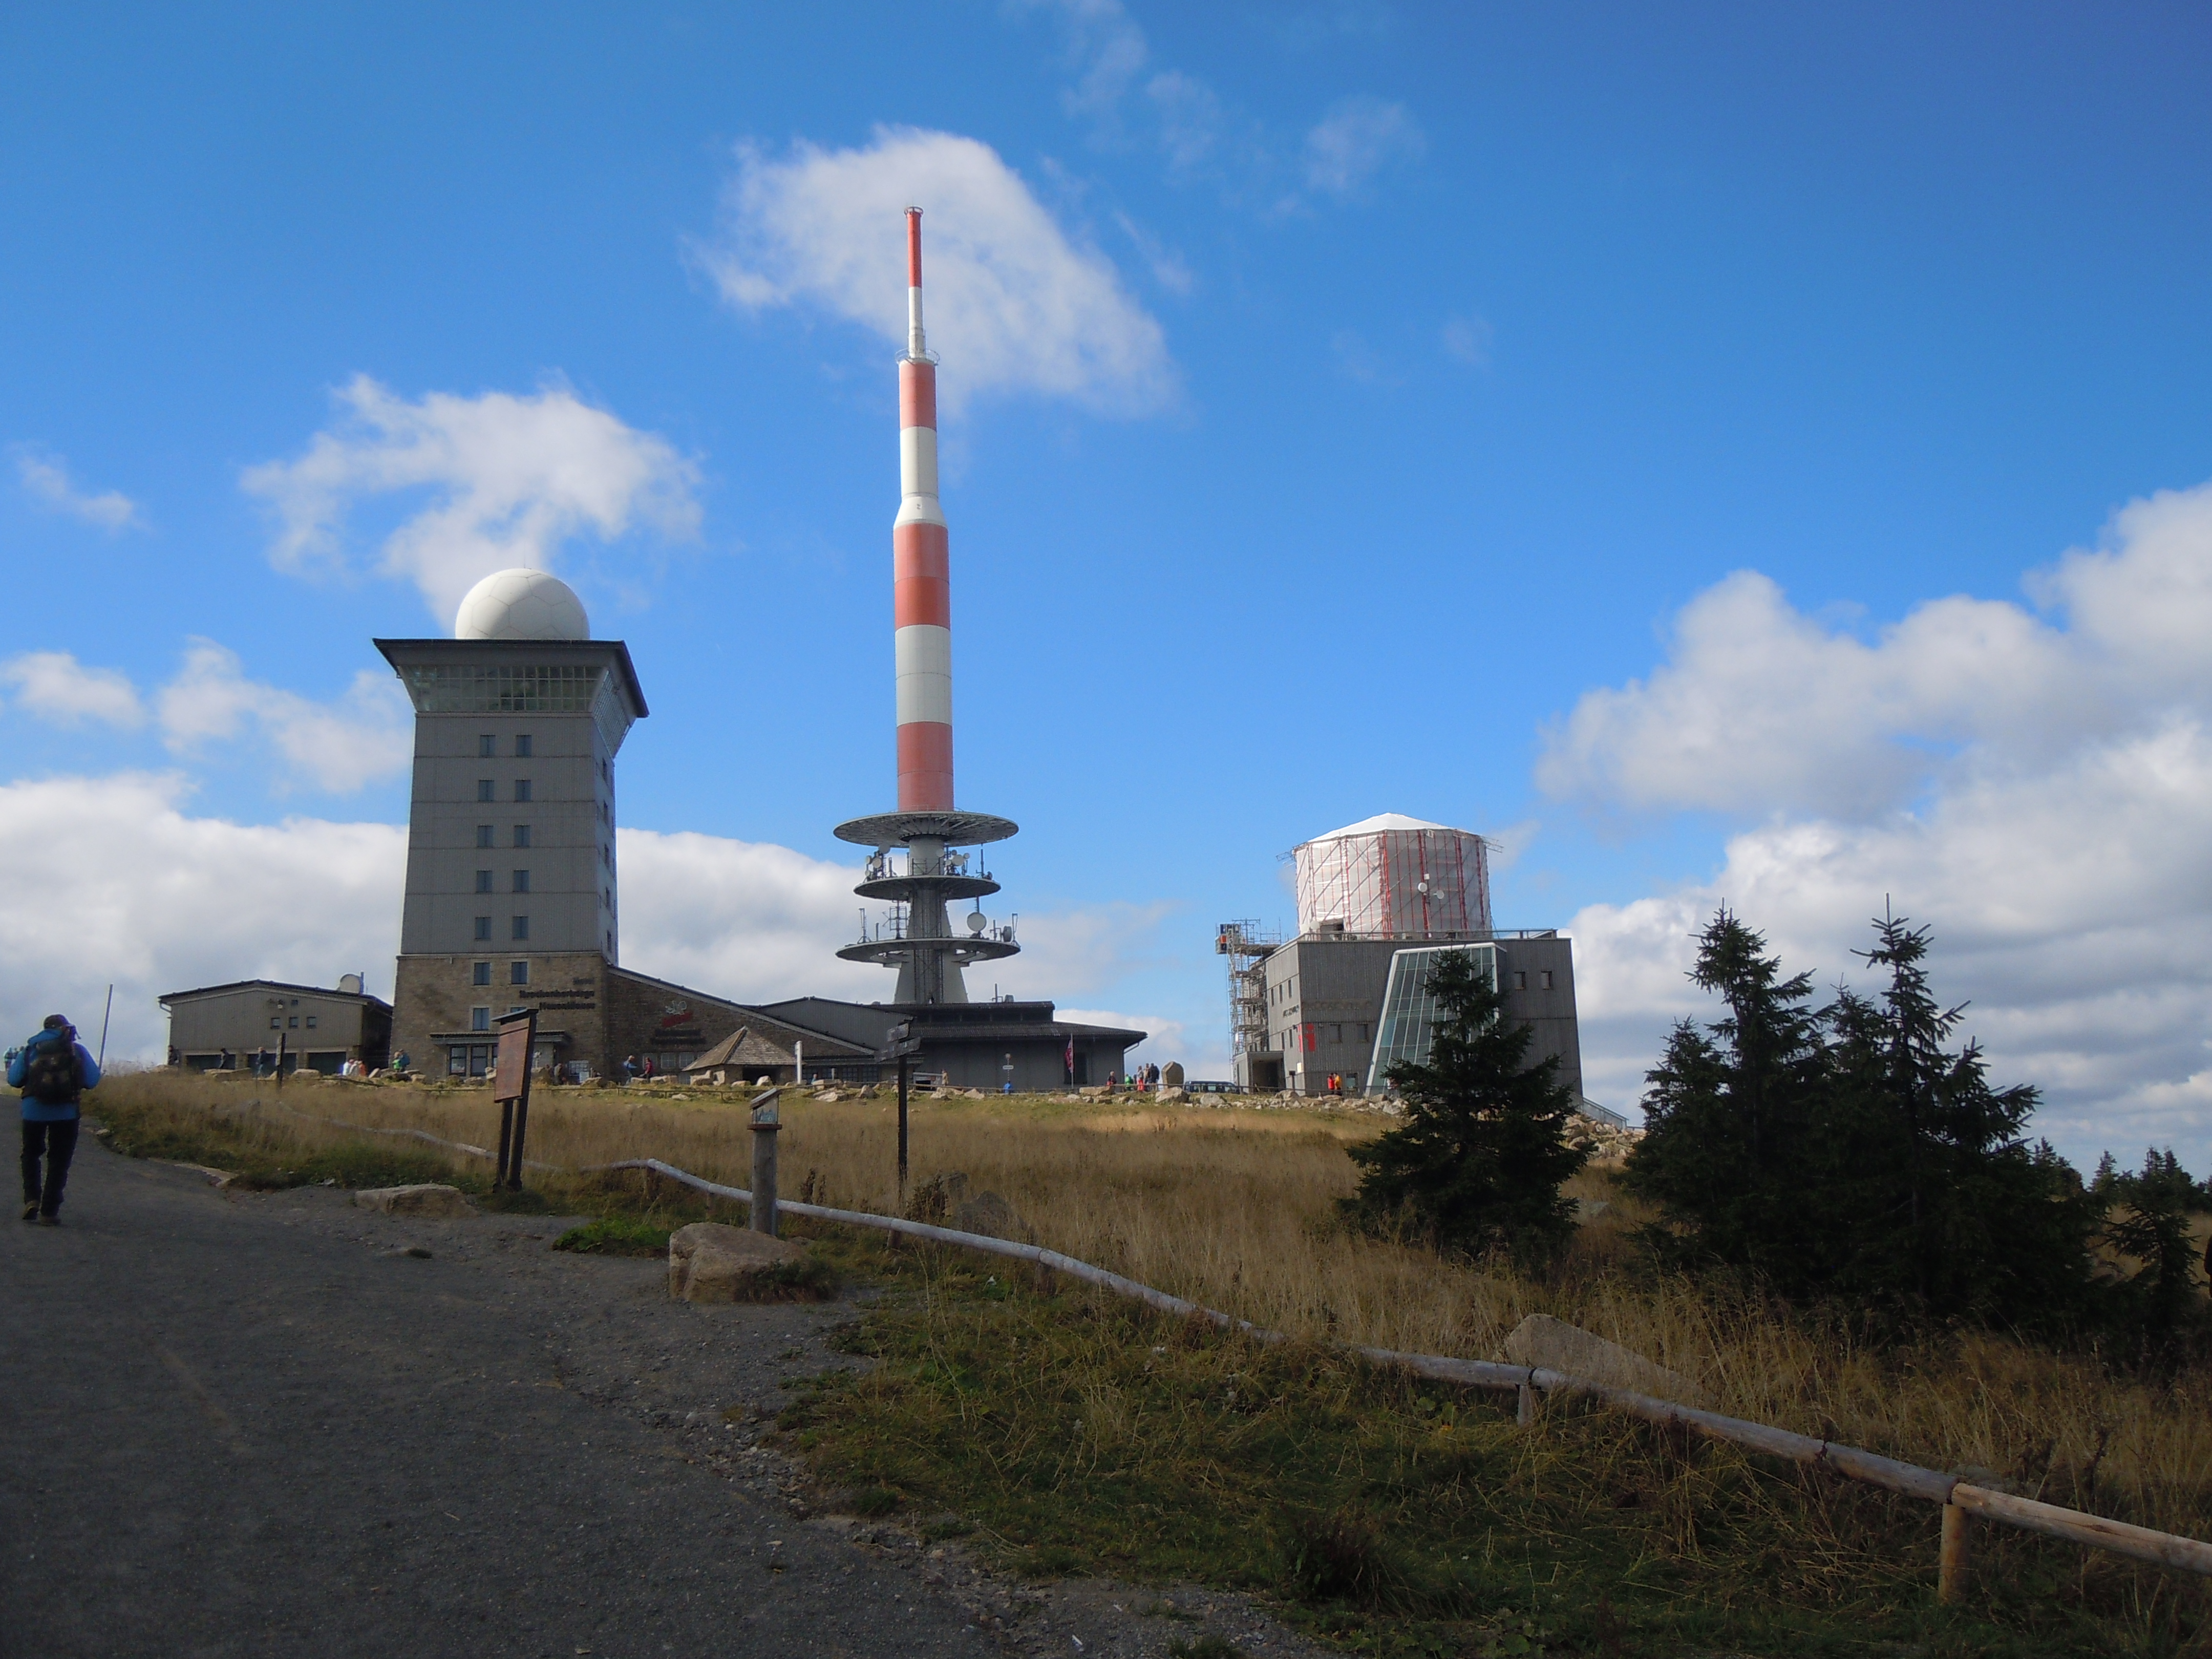 4-tages-wanderung-harz-213-141